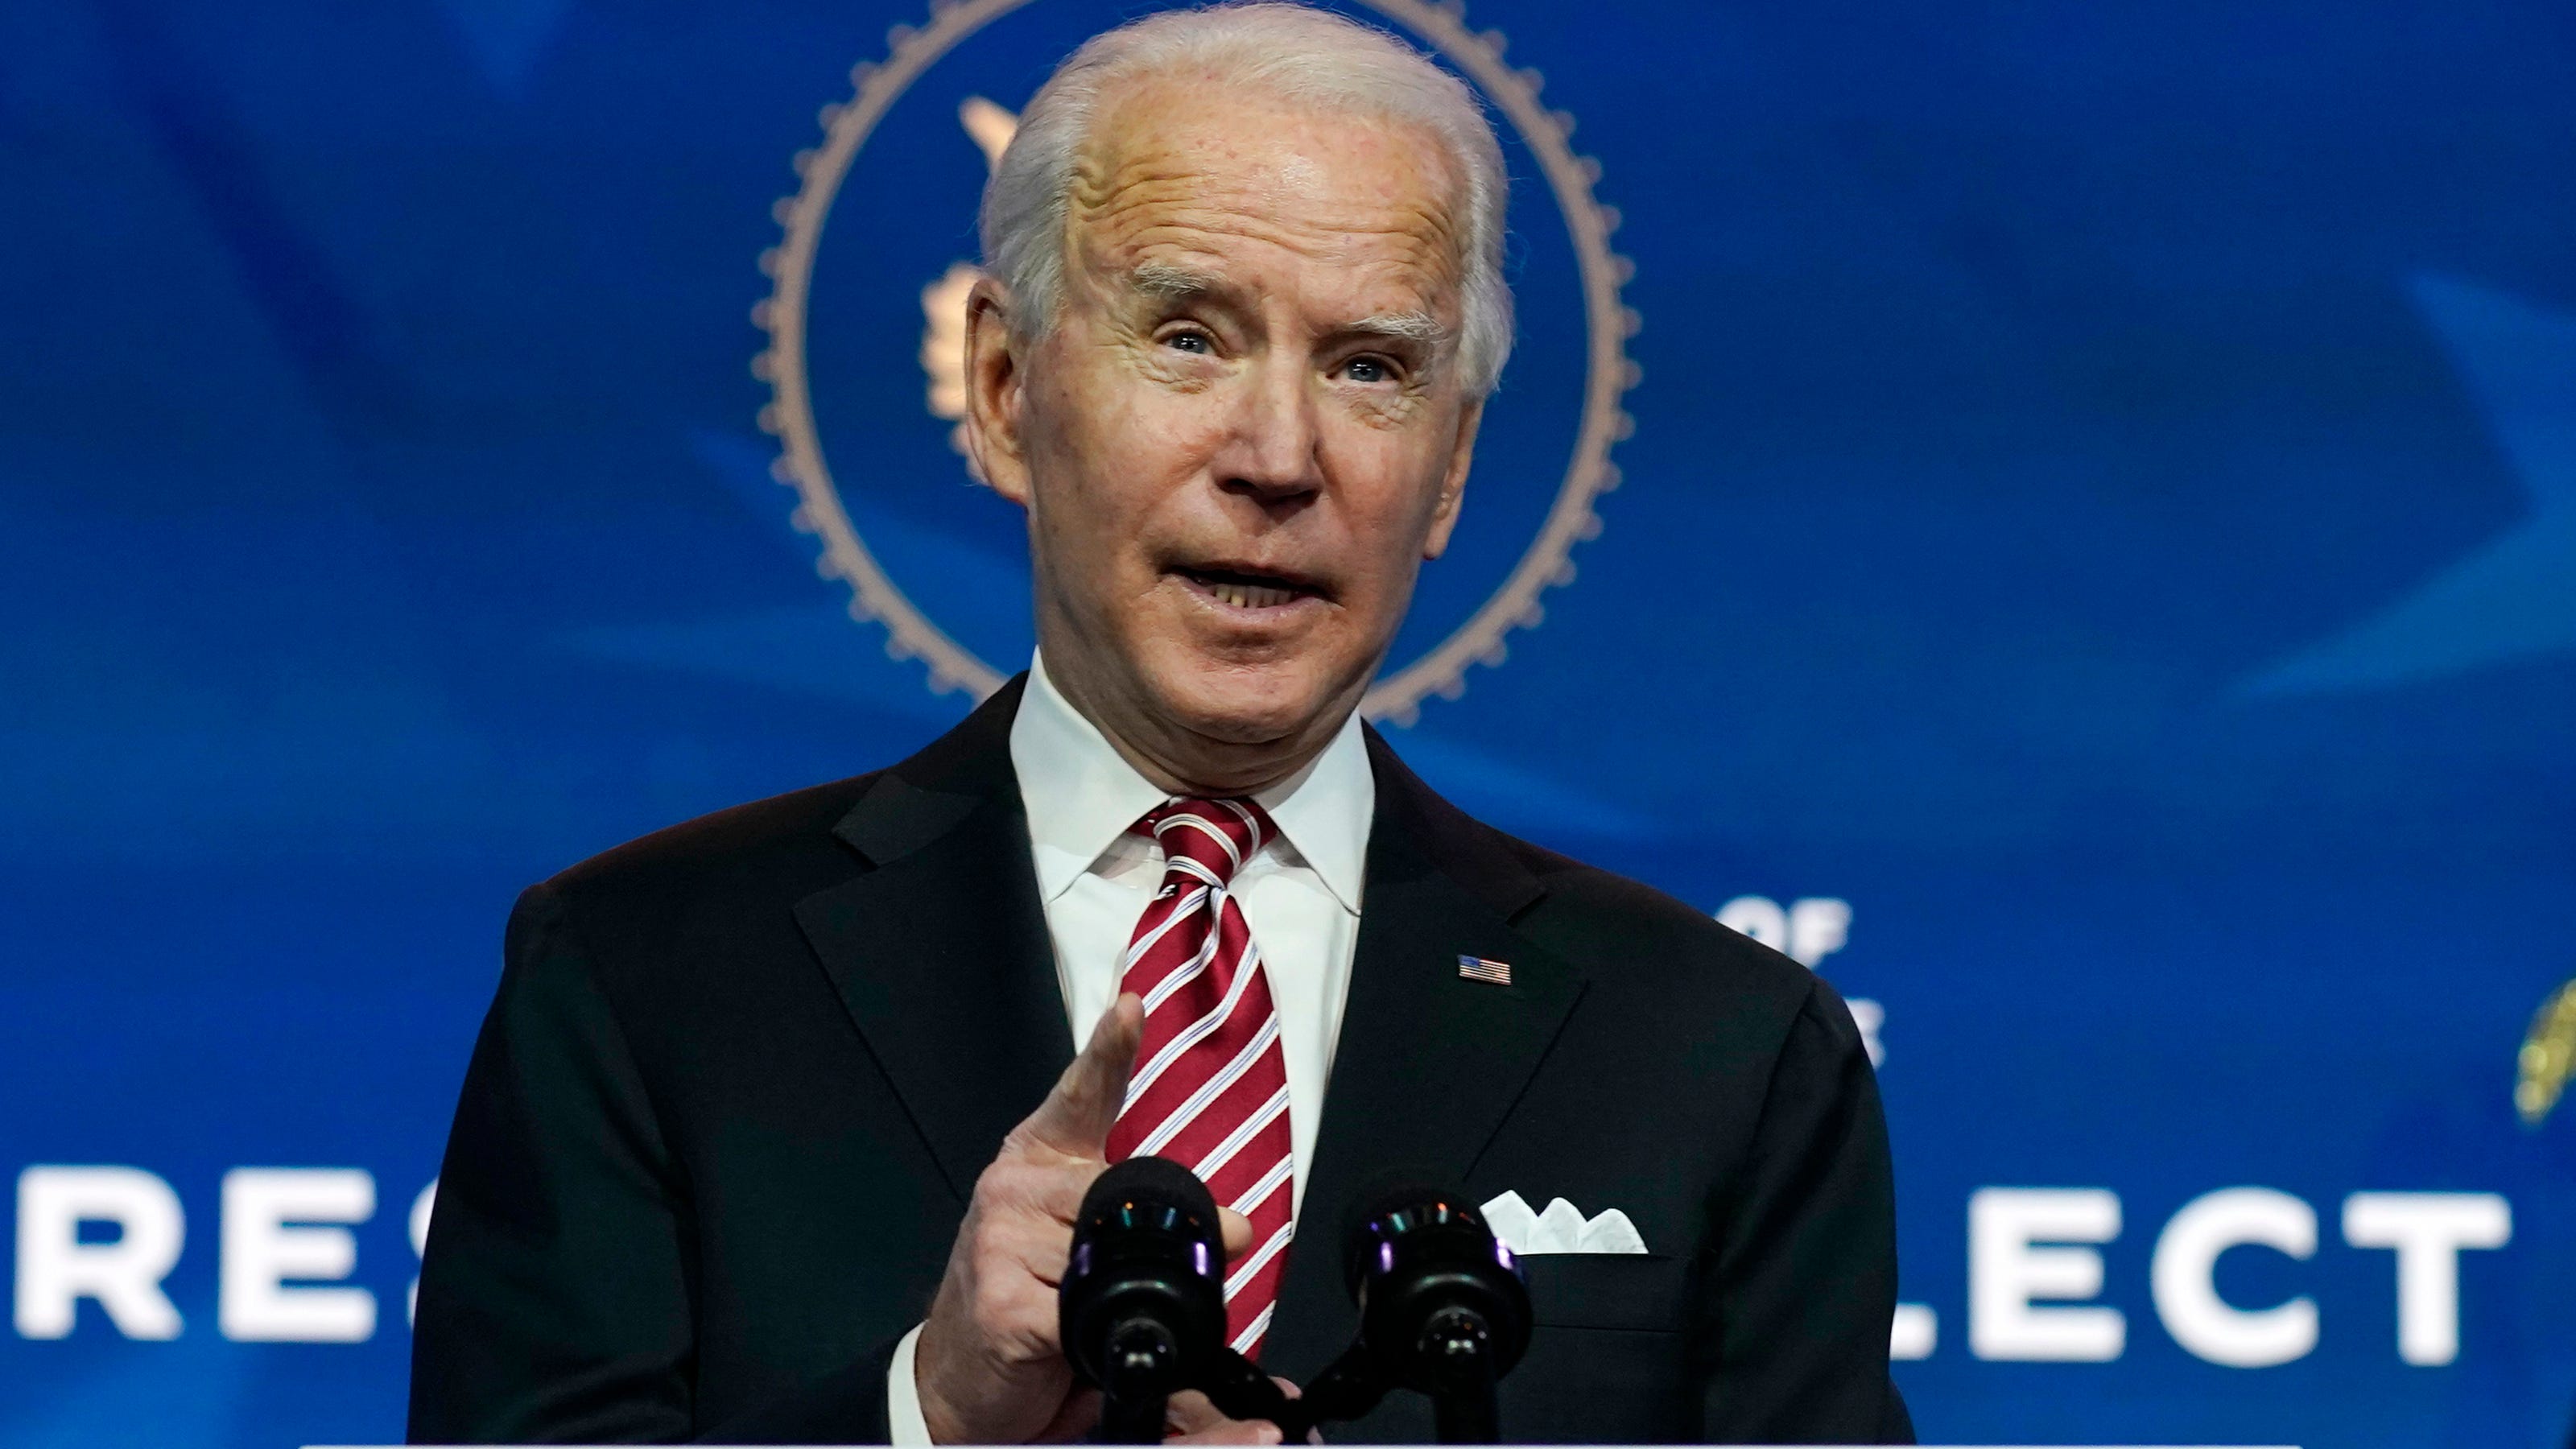 Biden plans to release available COVID-19 vaccines instead of holding back for second doses